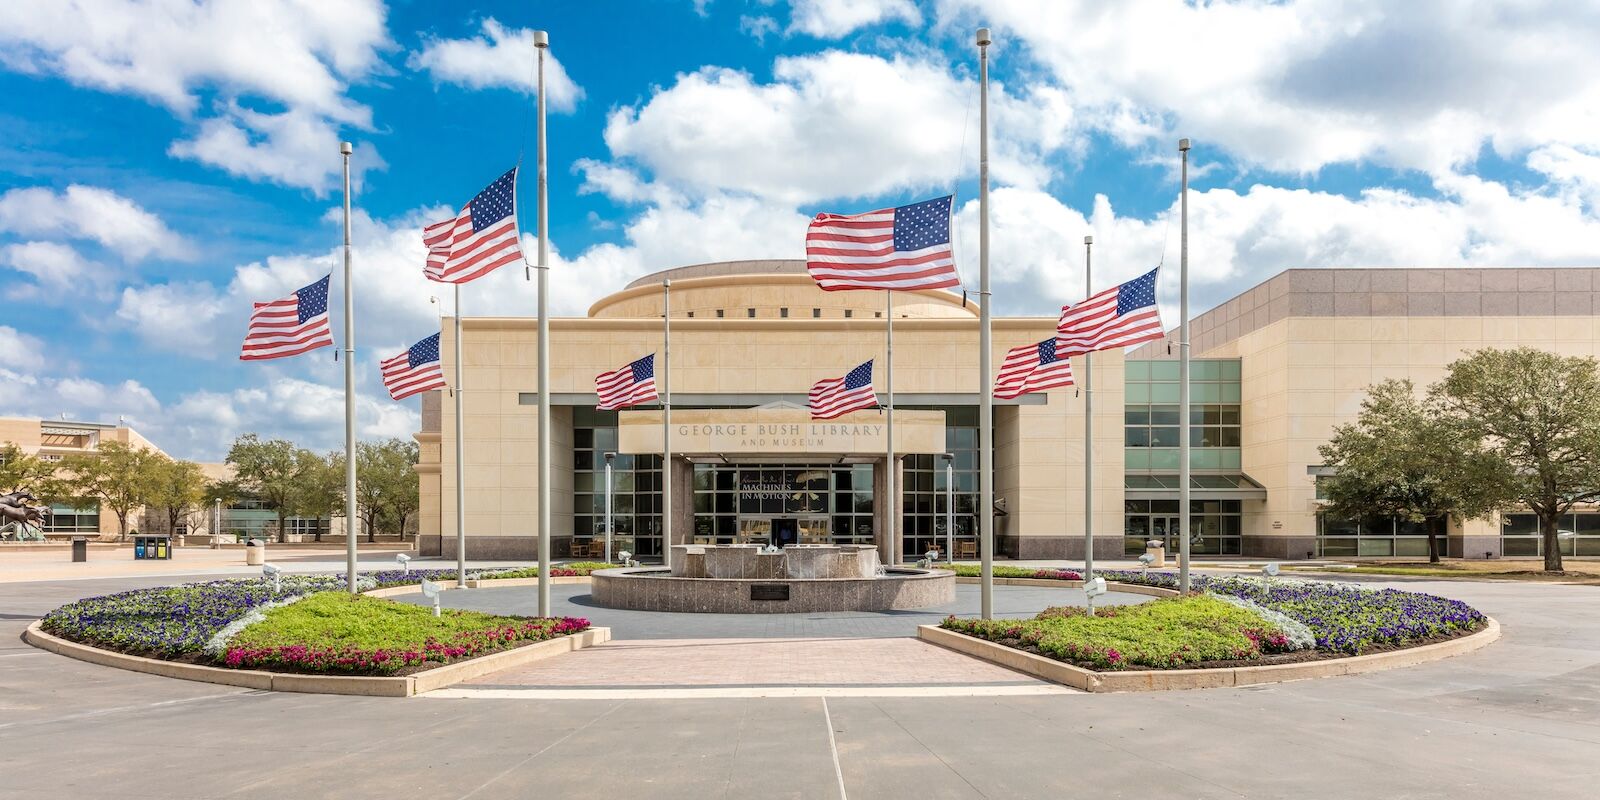 FEBRUARY 28, 2018 - COLLEGE STATION TEXAS - George H.W. Bush Presidential Library and Museum